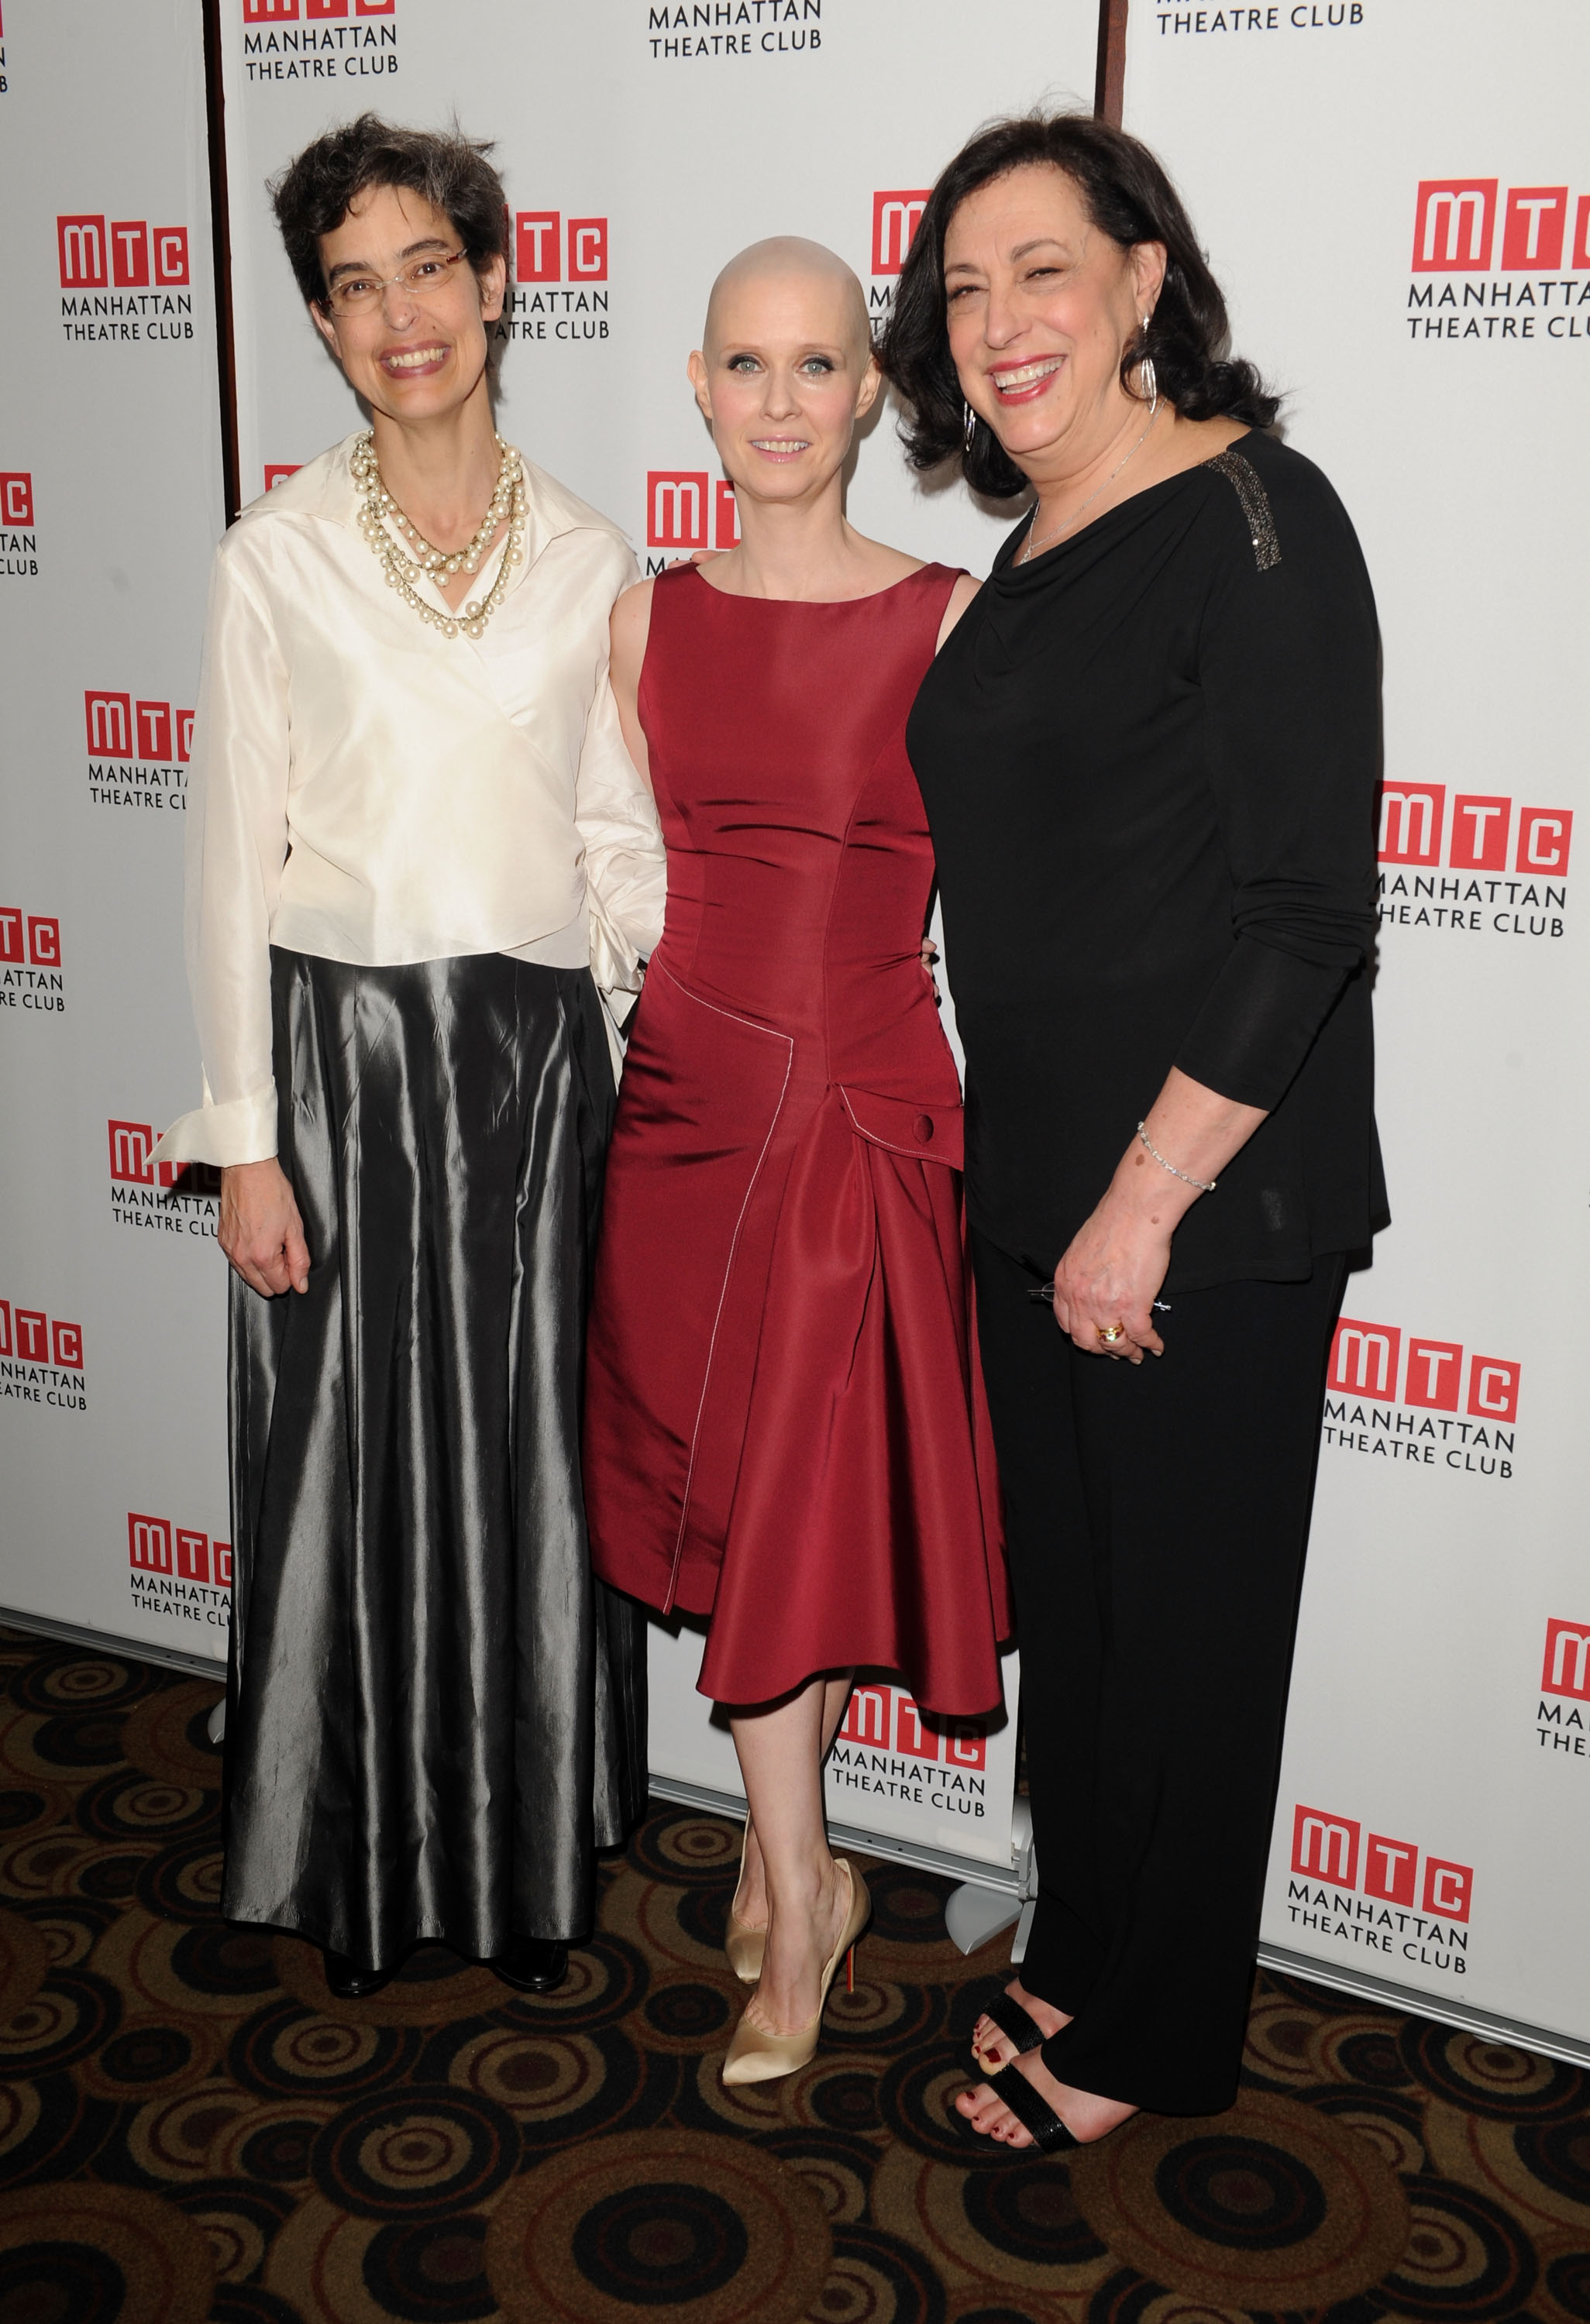 Margaret Edson, Synthia Nixon and Lynne Meadow on January 26, 2012, in New York City. | Source: Getty Images